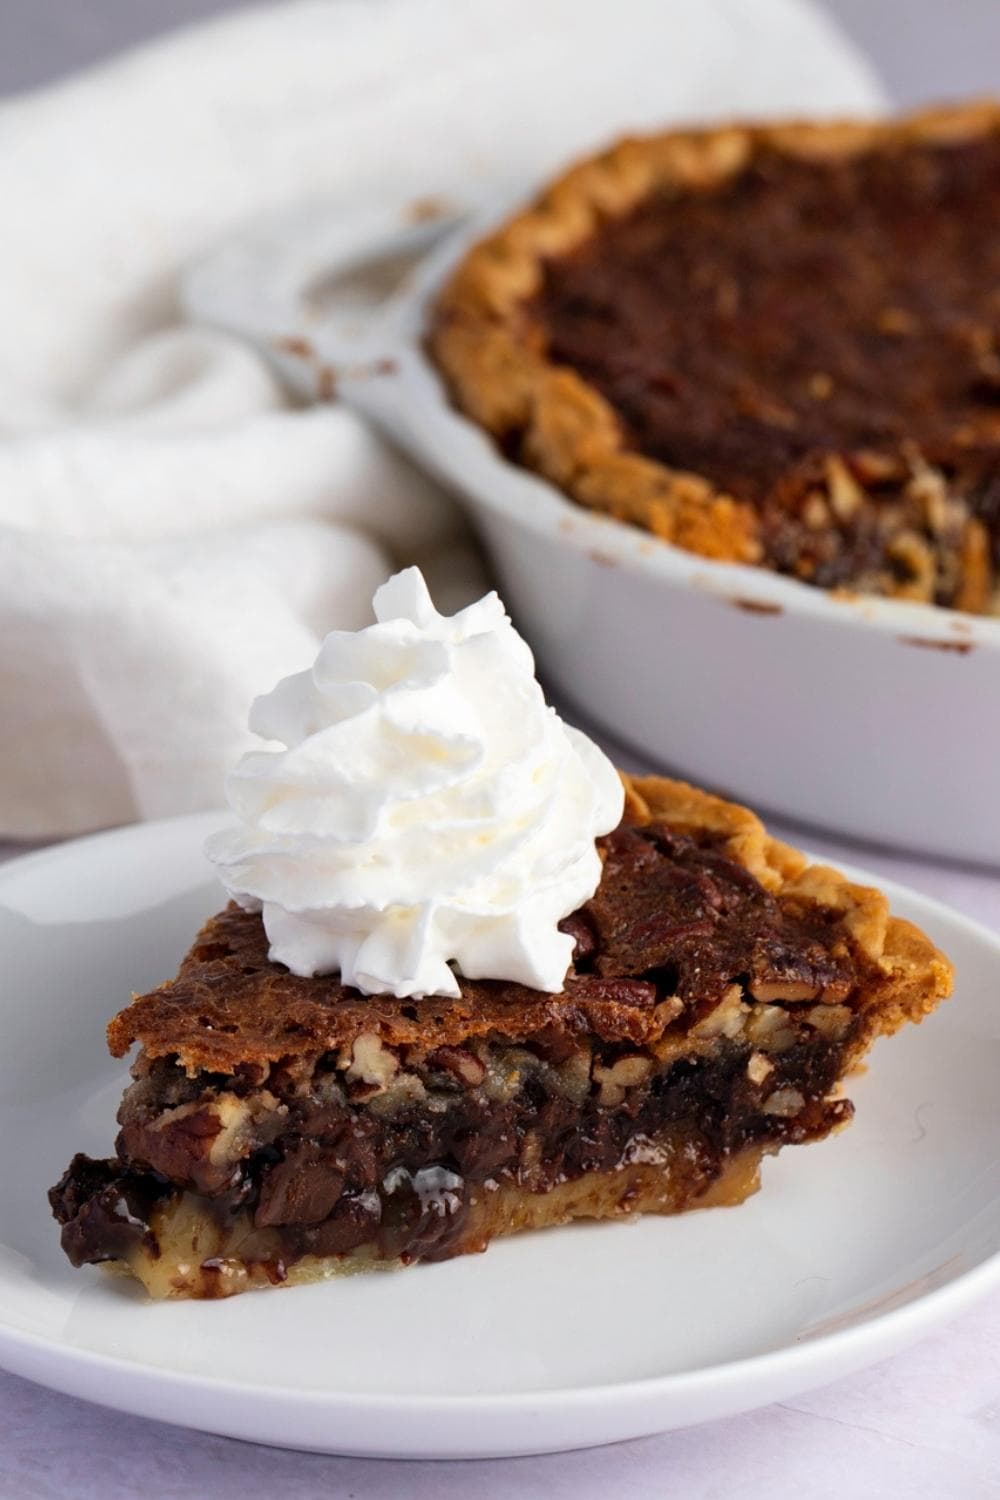 A slice of pie with chocolatey pecan filling and pump of whipped cream on top.